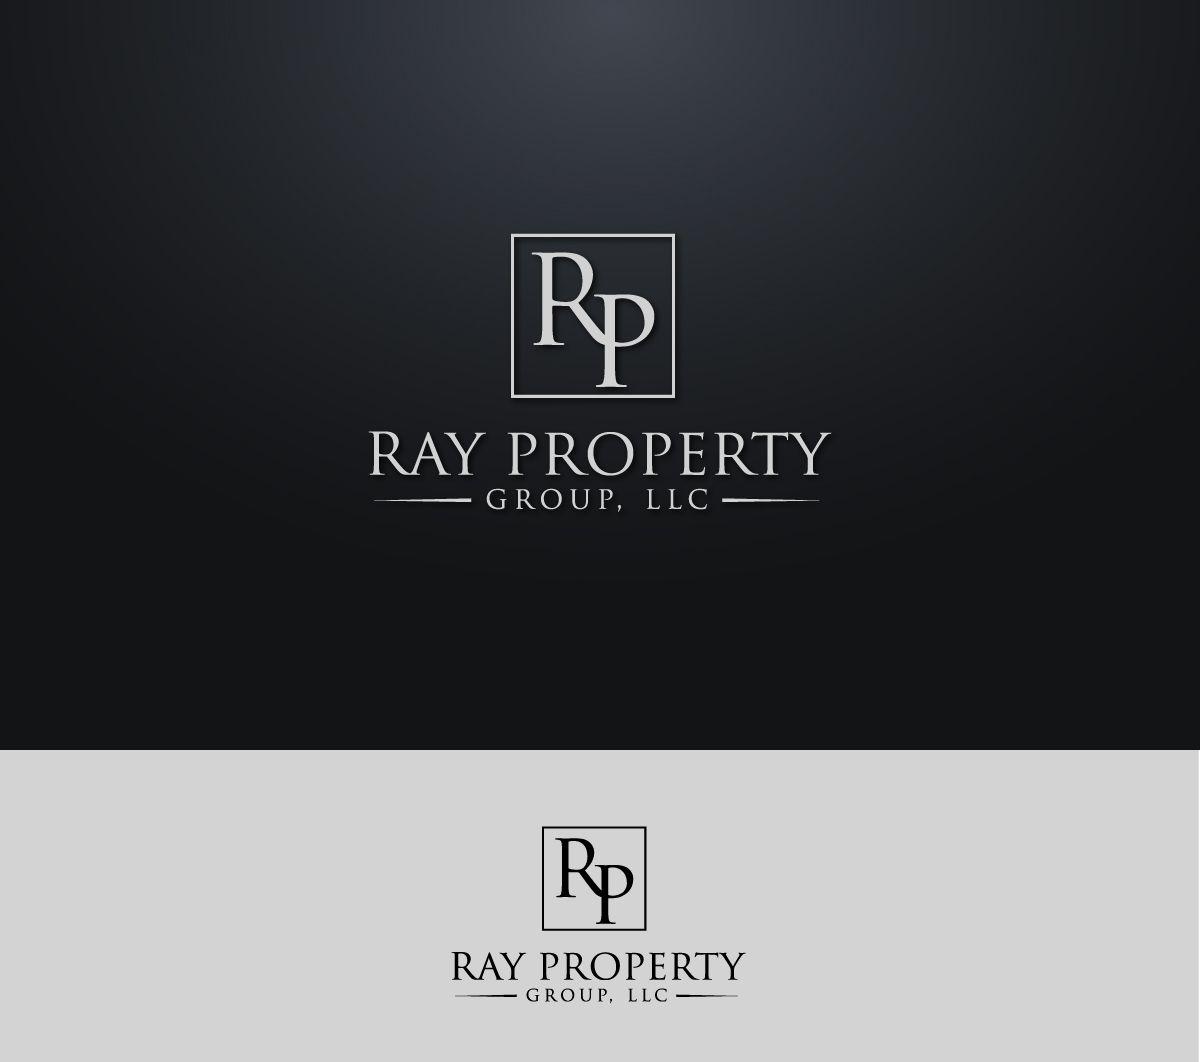 Silver Company Logo - Serious, Professional, Business Logo Design for Ray Property Group